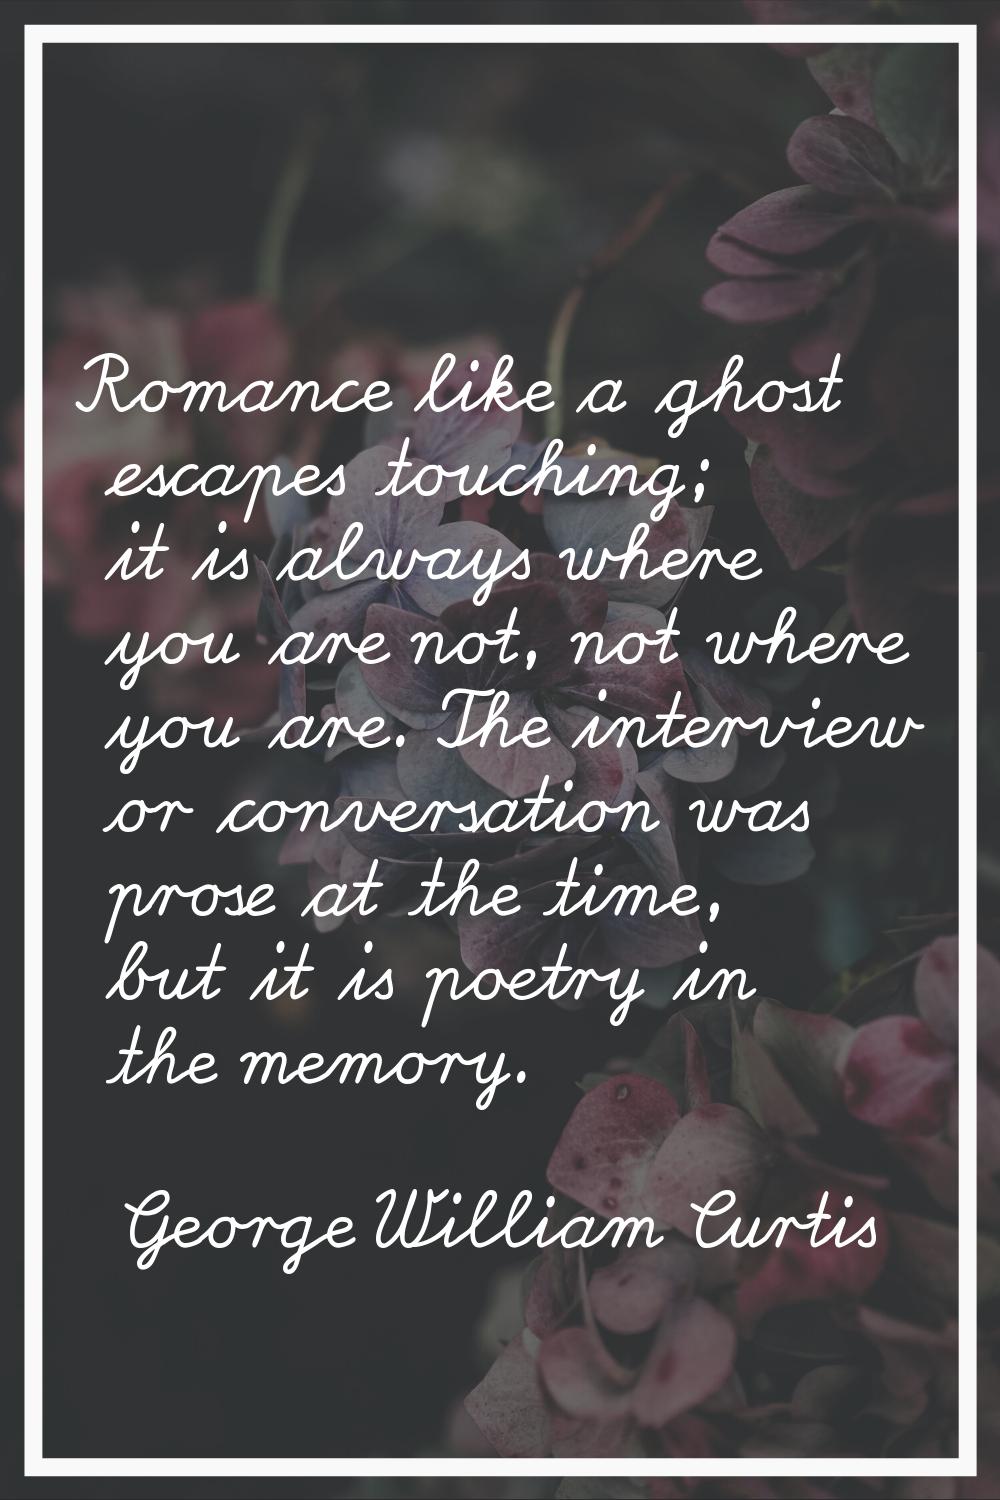 Romance like a ghost escapes touching; it is always where you are not, not where you are. The inter